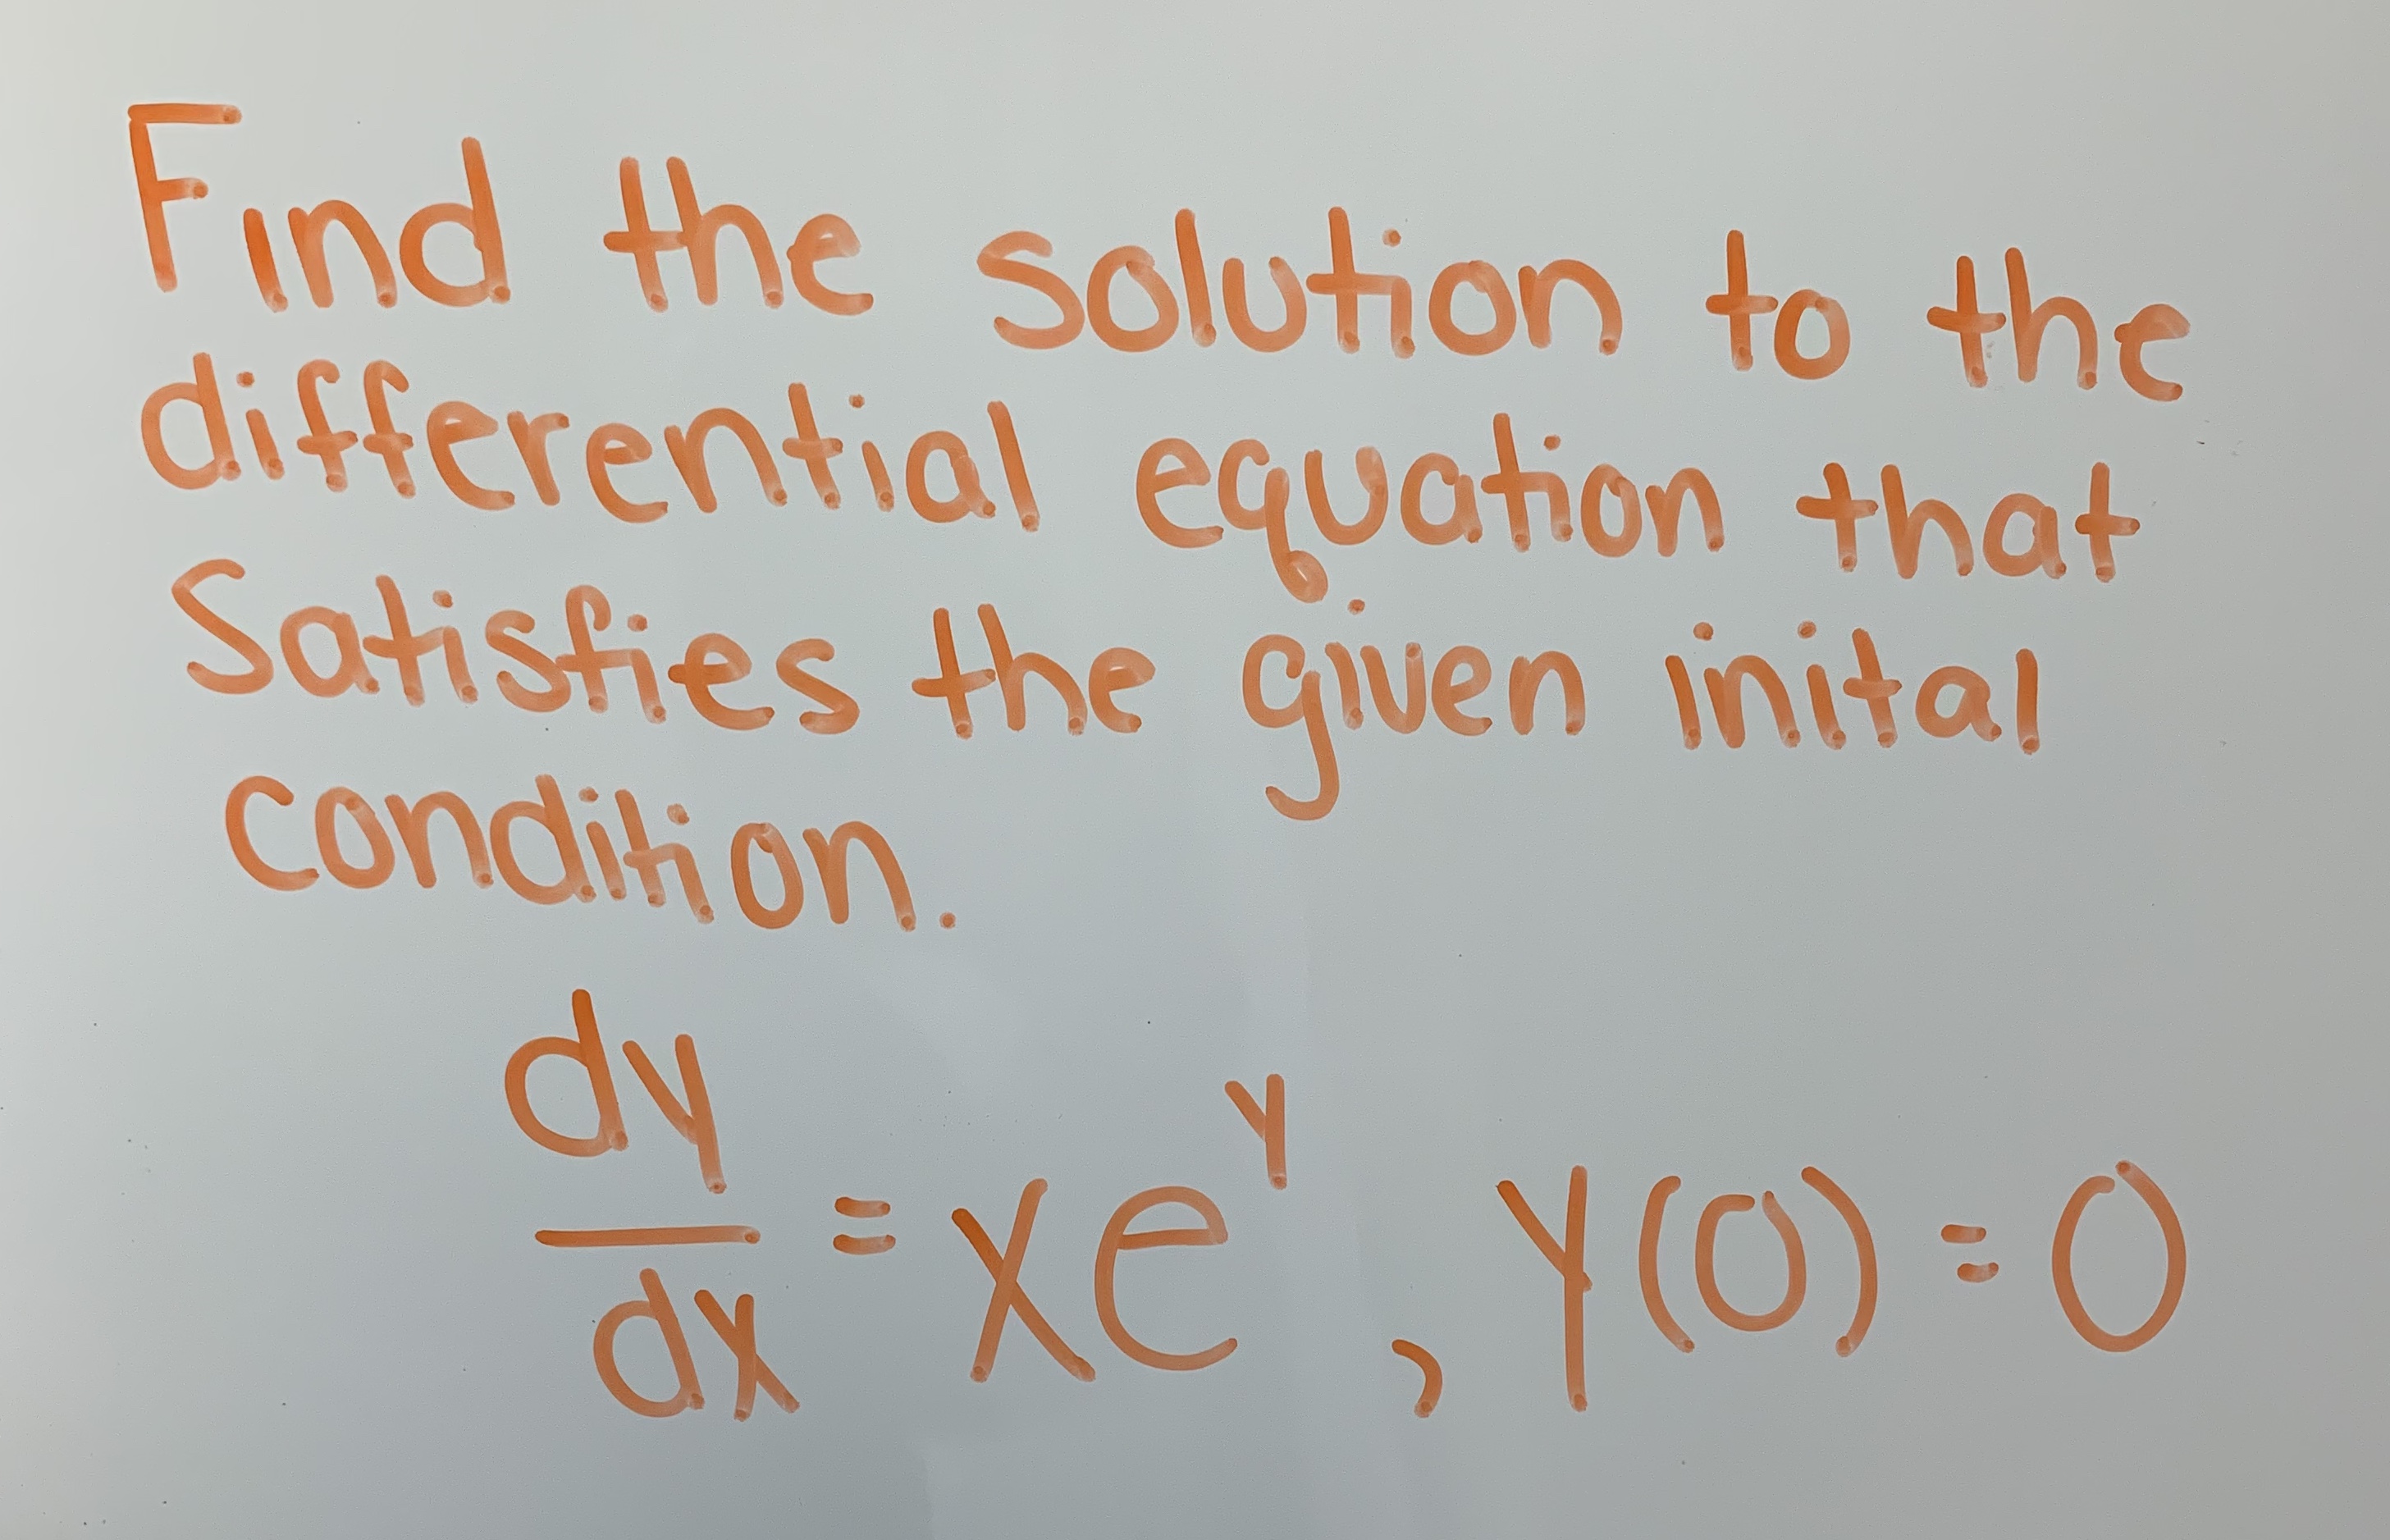 Find the solution to the
differential equotion that
Sotisies the quen inital
condiion
